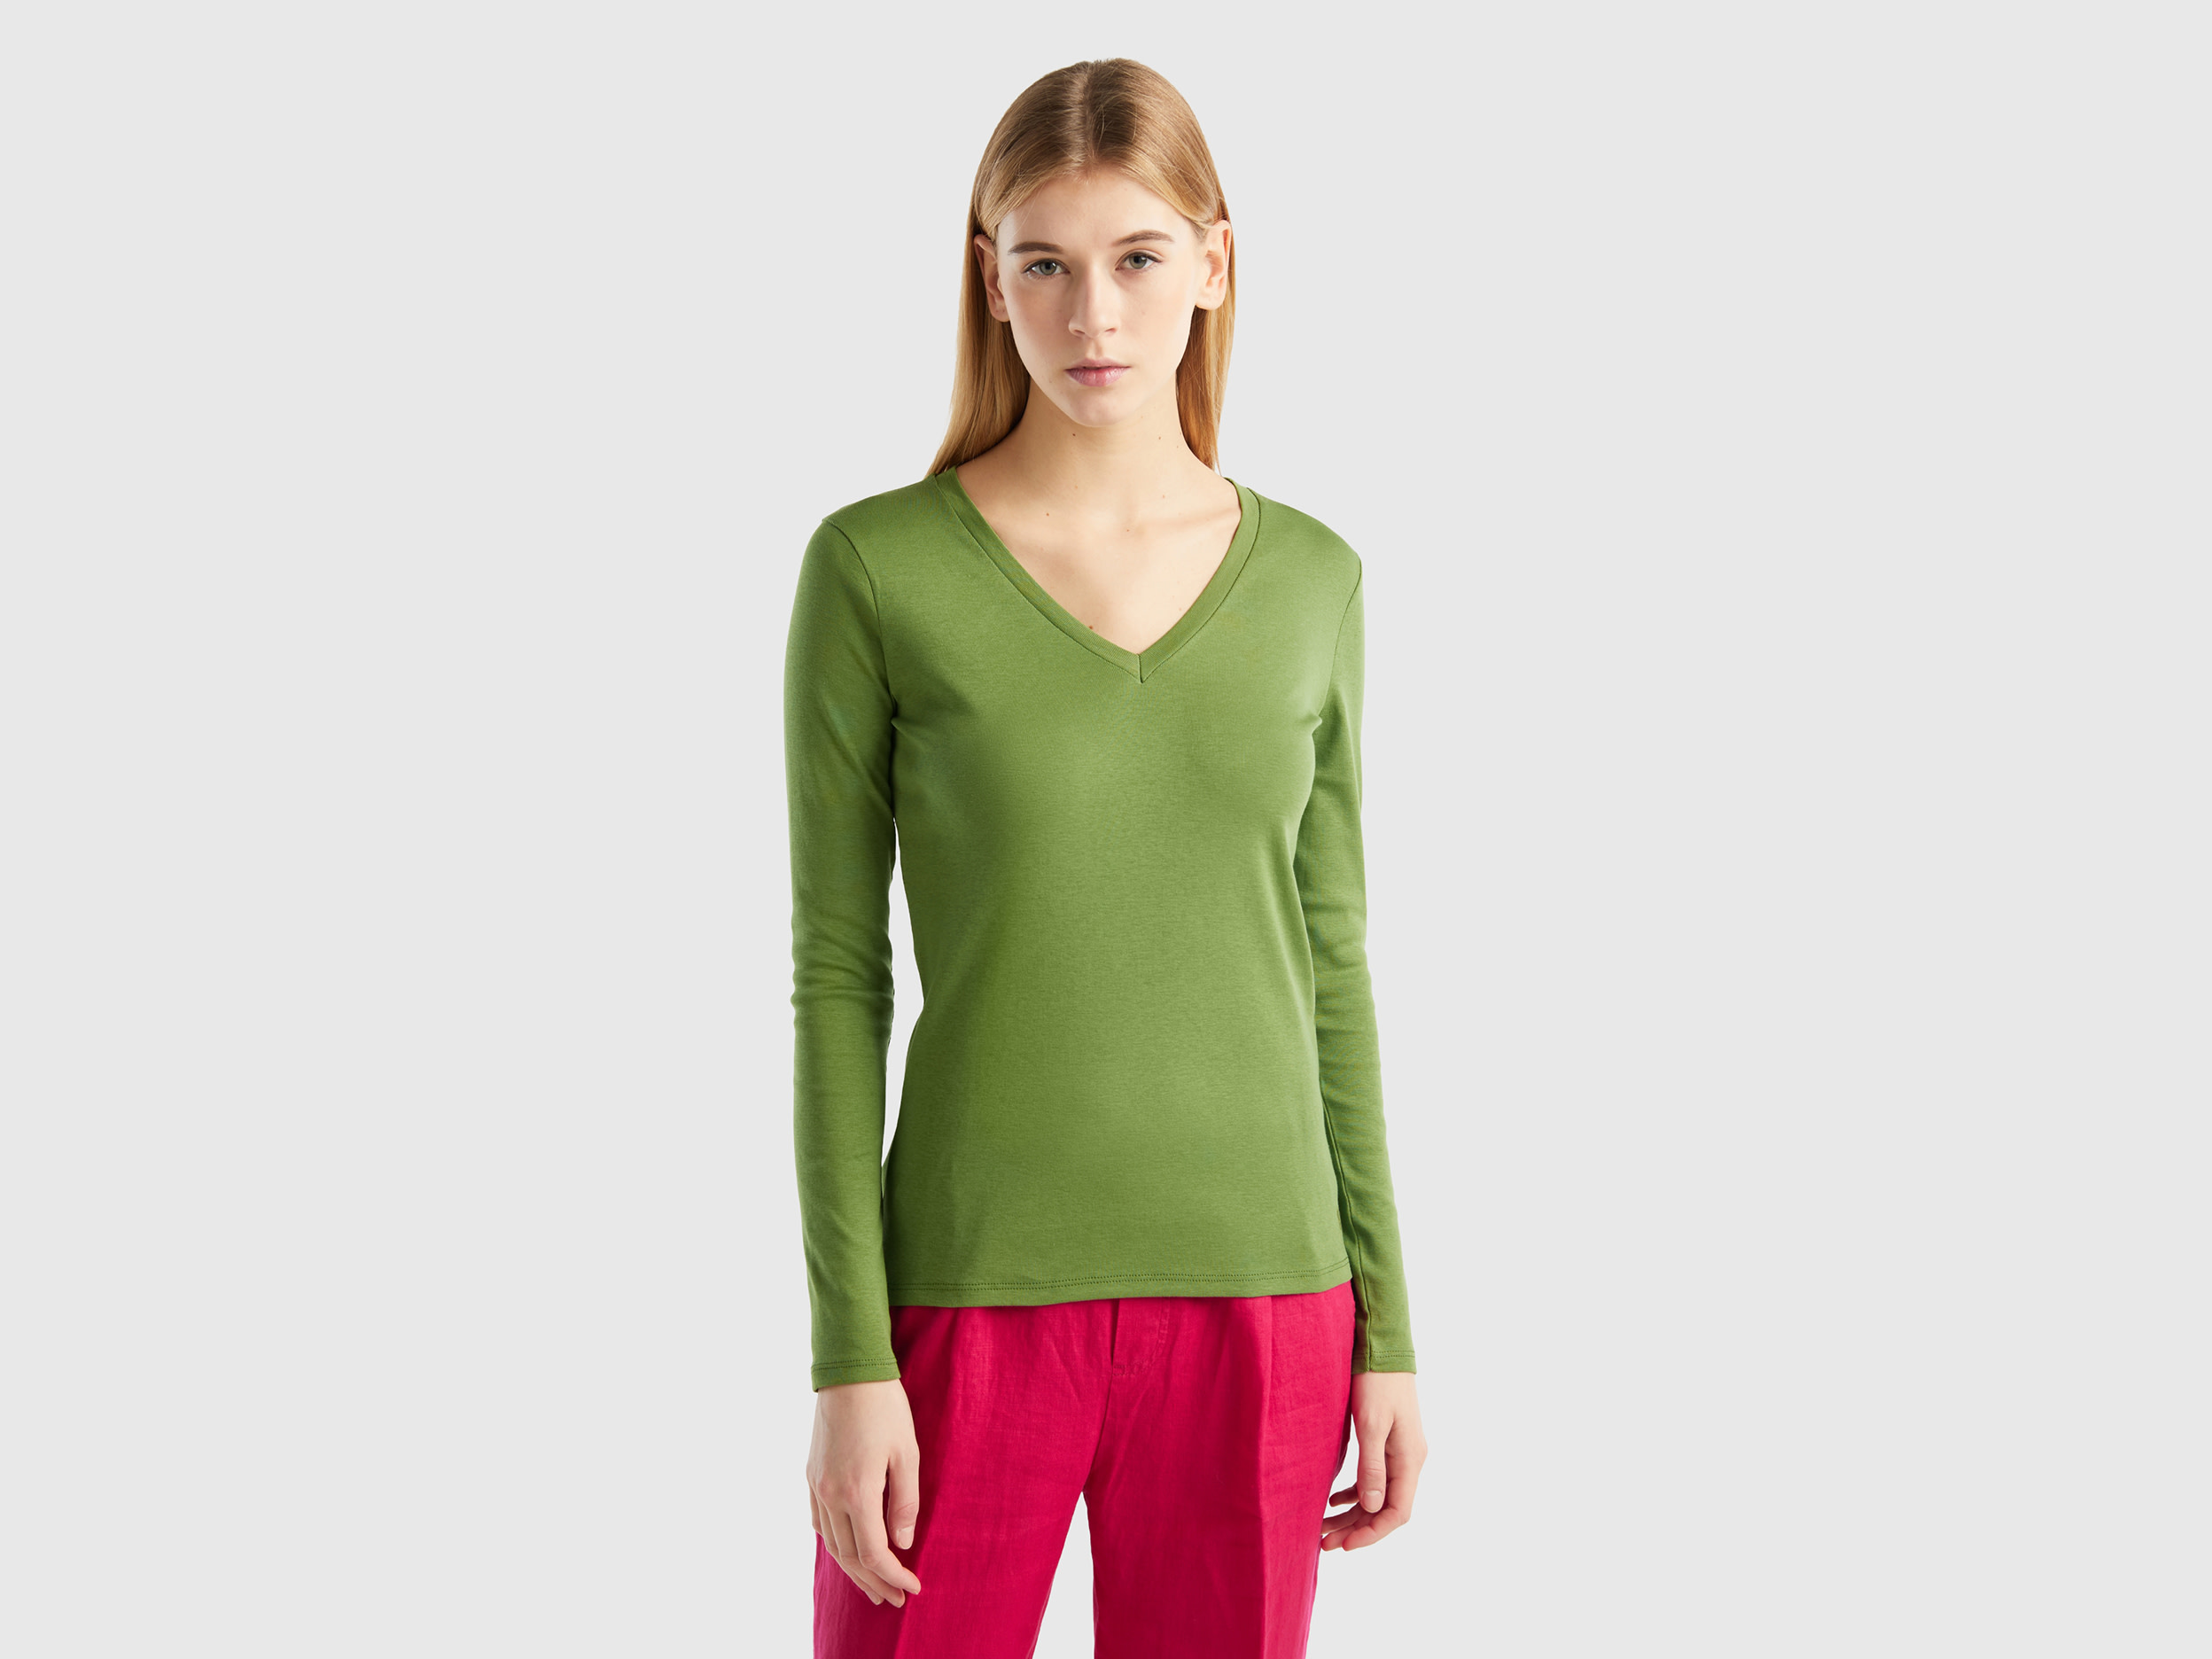 Benetton, Long Sleeve T-shirt With V-neck, size M, Military Green, Women